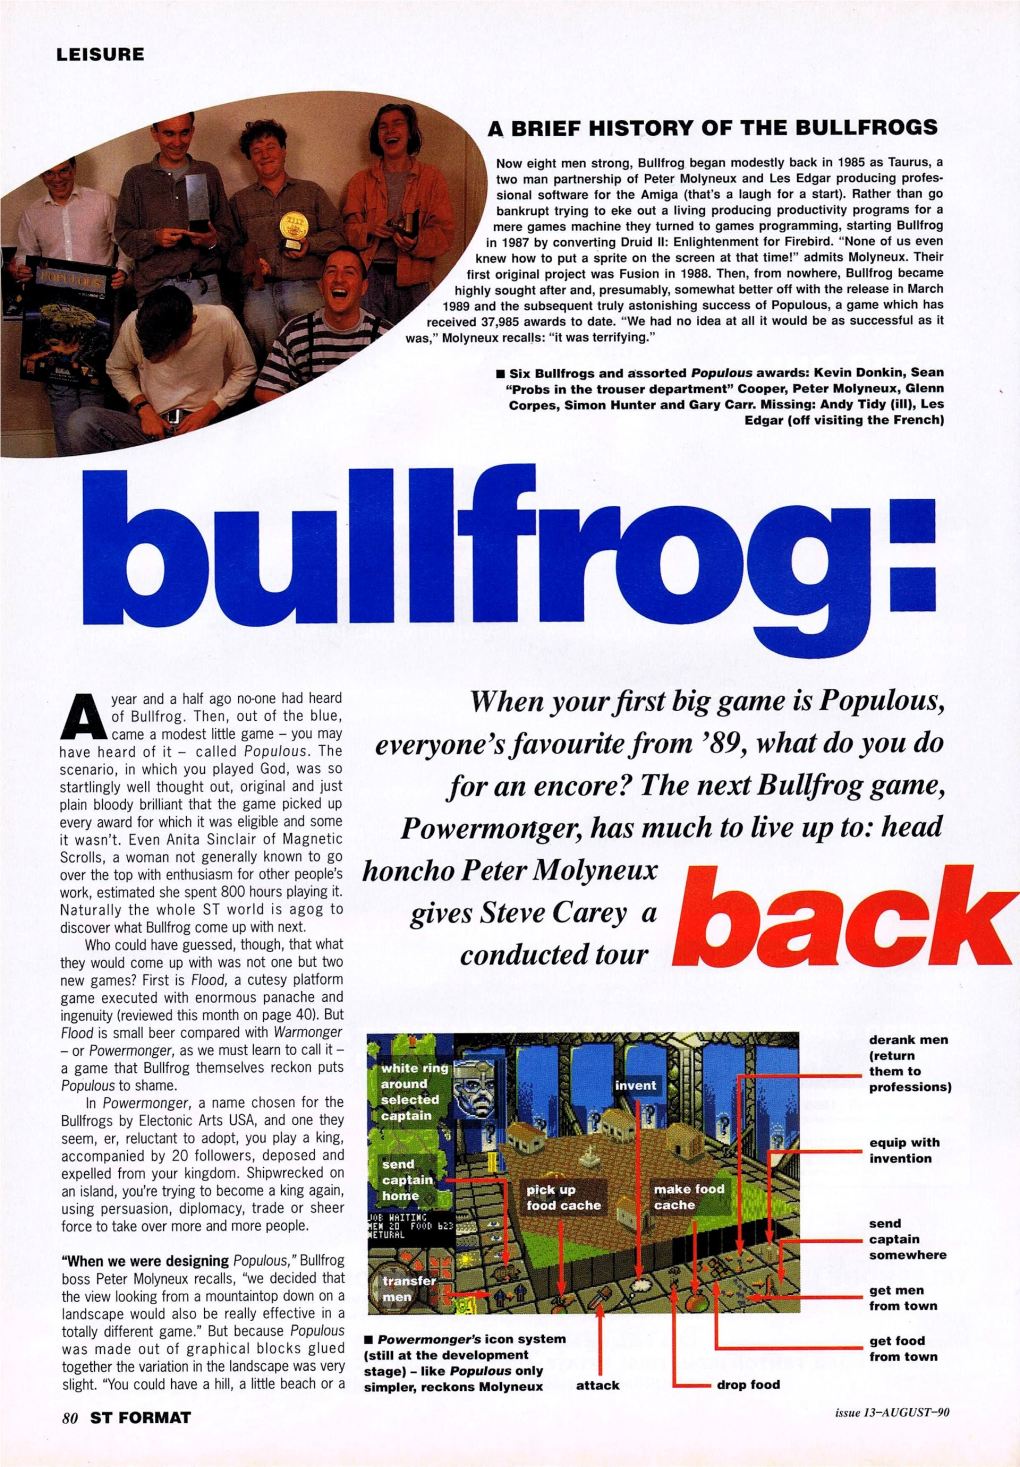 89, What Do You Do for an Encore? the Next Bullfrog Game, Power